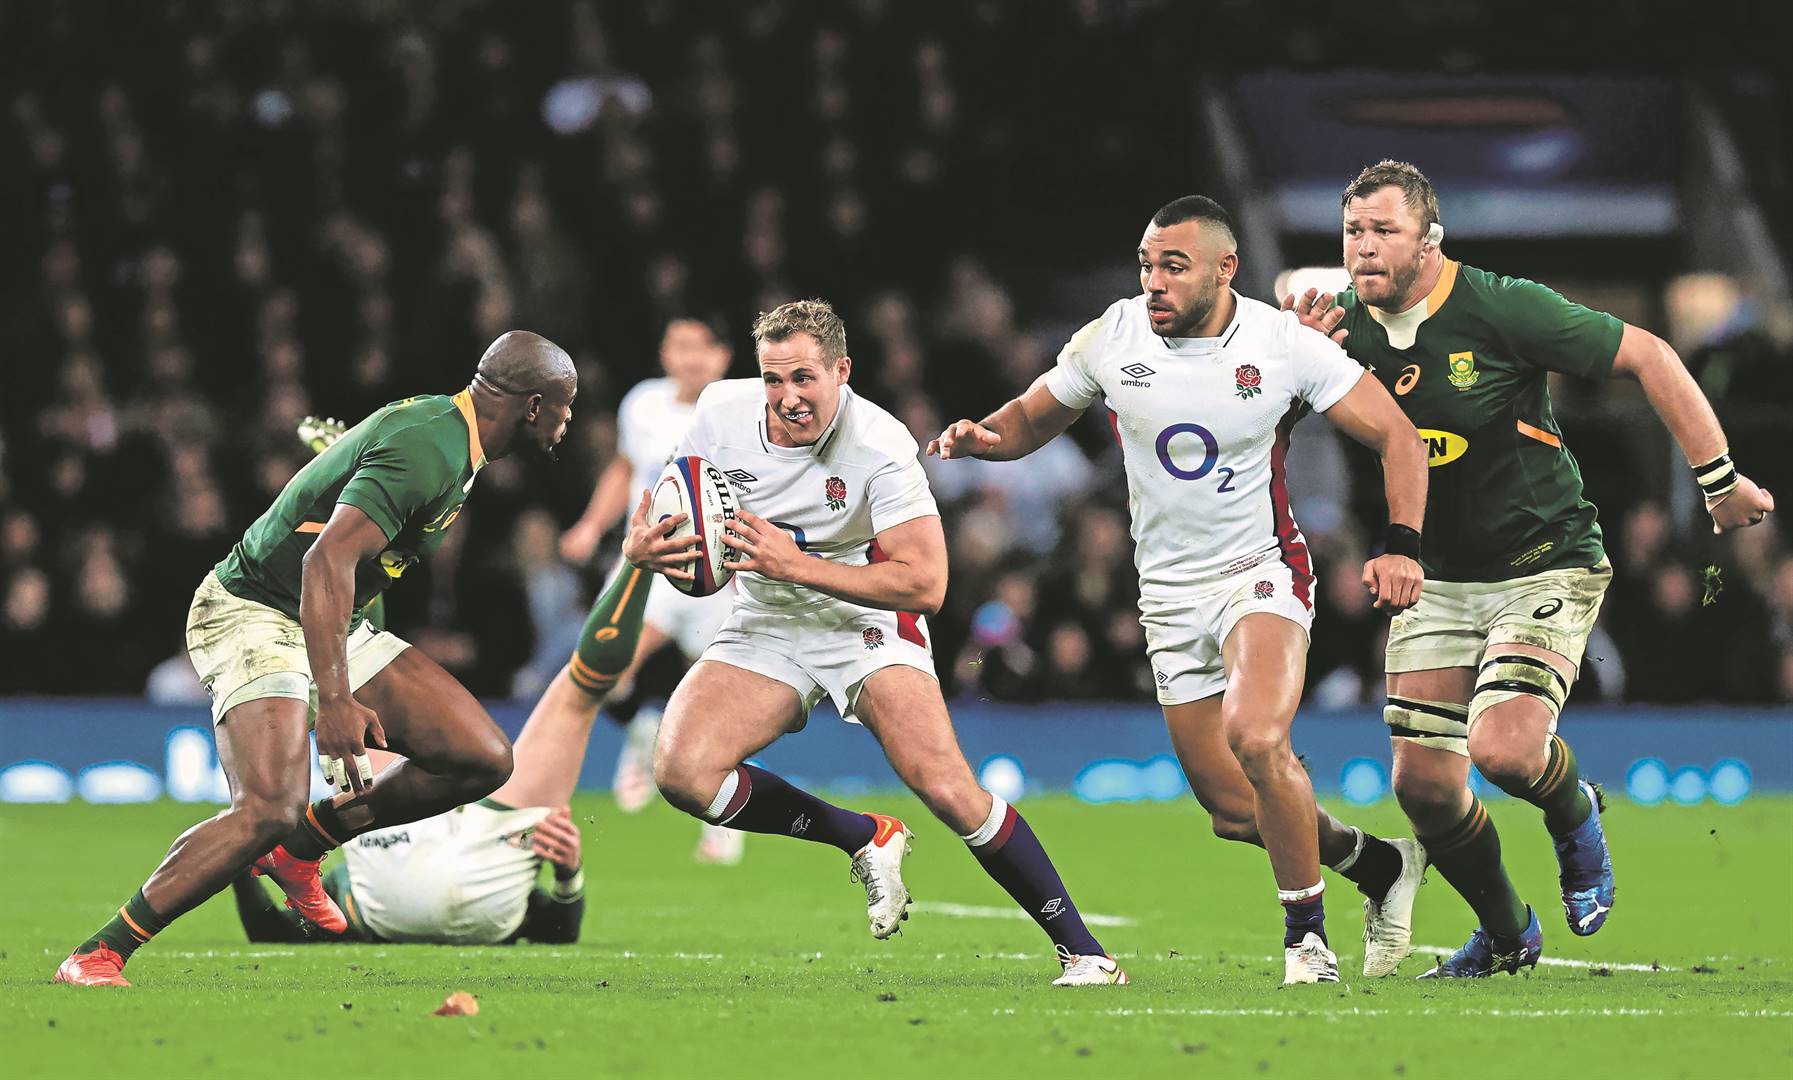 England’s Max Malins tries to take on Springbok Makazole Mapimpi during their Autumn Nations Series match at Twickenham Stadium on November 20. Photo: David Rogers/Getty Images